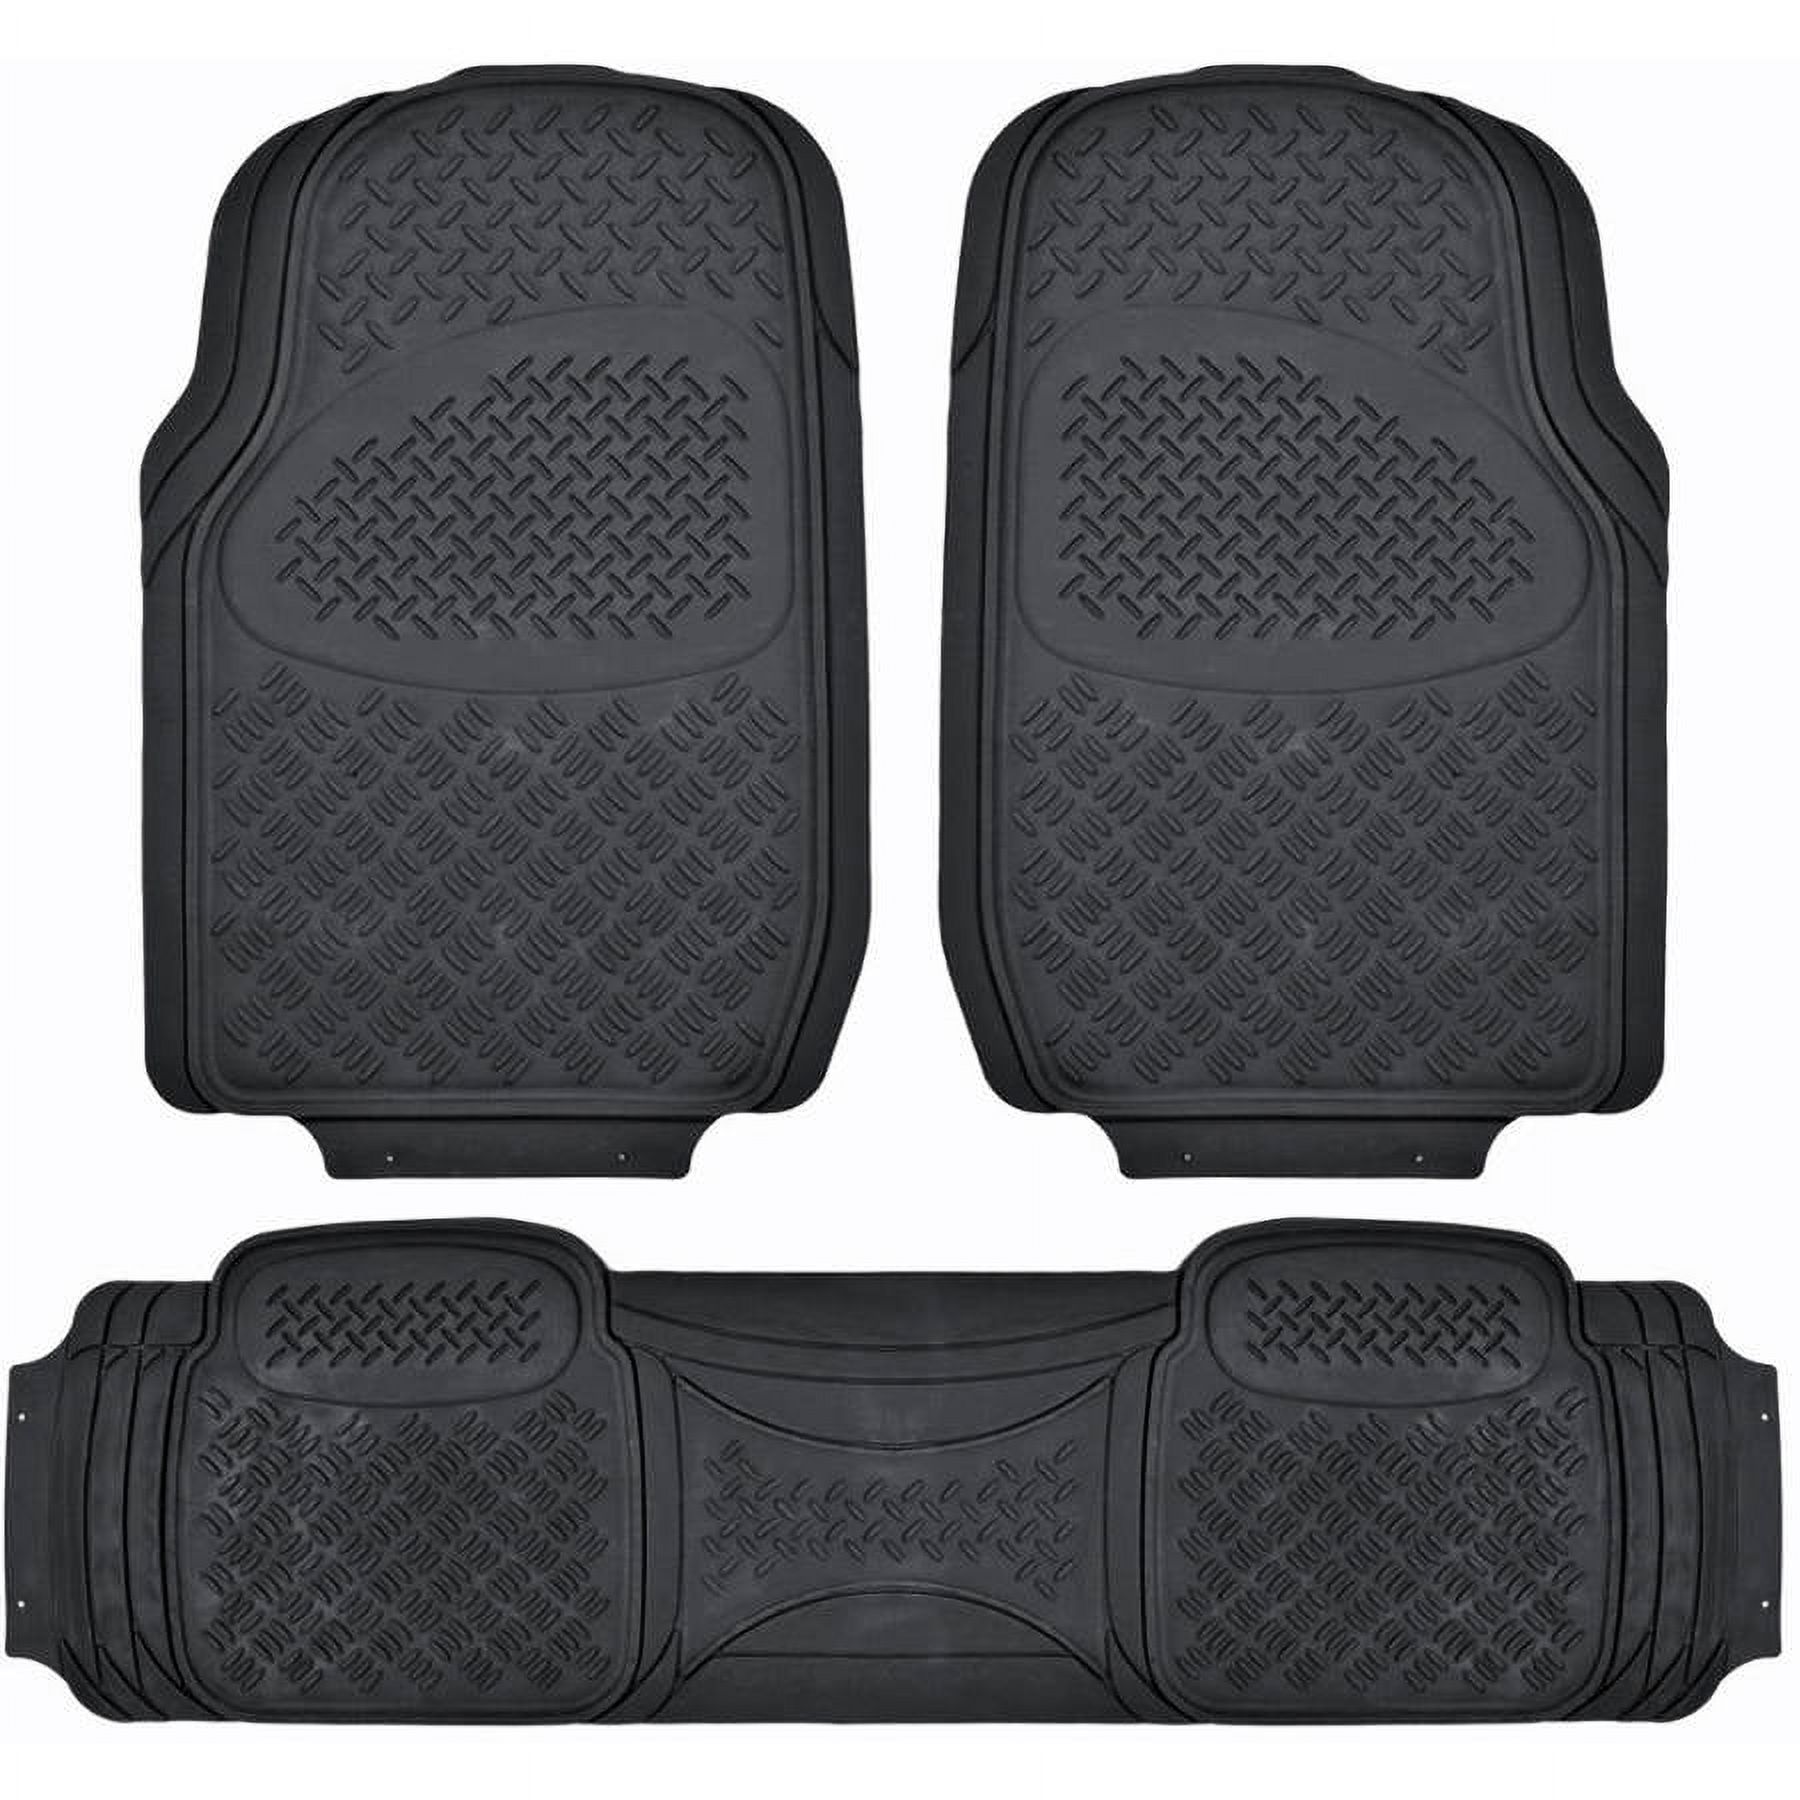 BDK Super Duty Rubber Floor Mats for Car SUV and Van 3 Rows with Cargo Mat, All Weather, Heavy Duty, 3 Colors - image 2 of 12